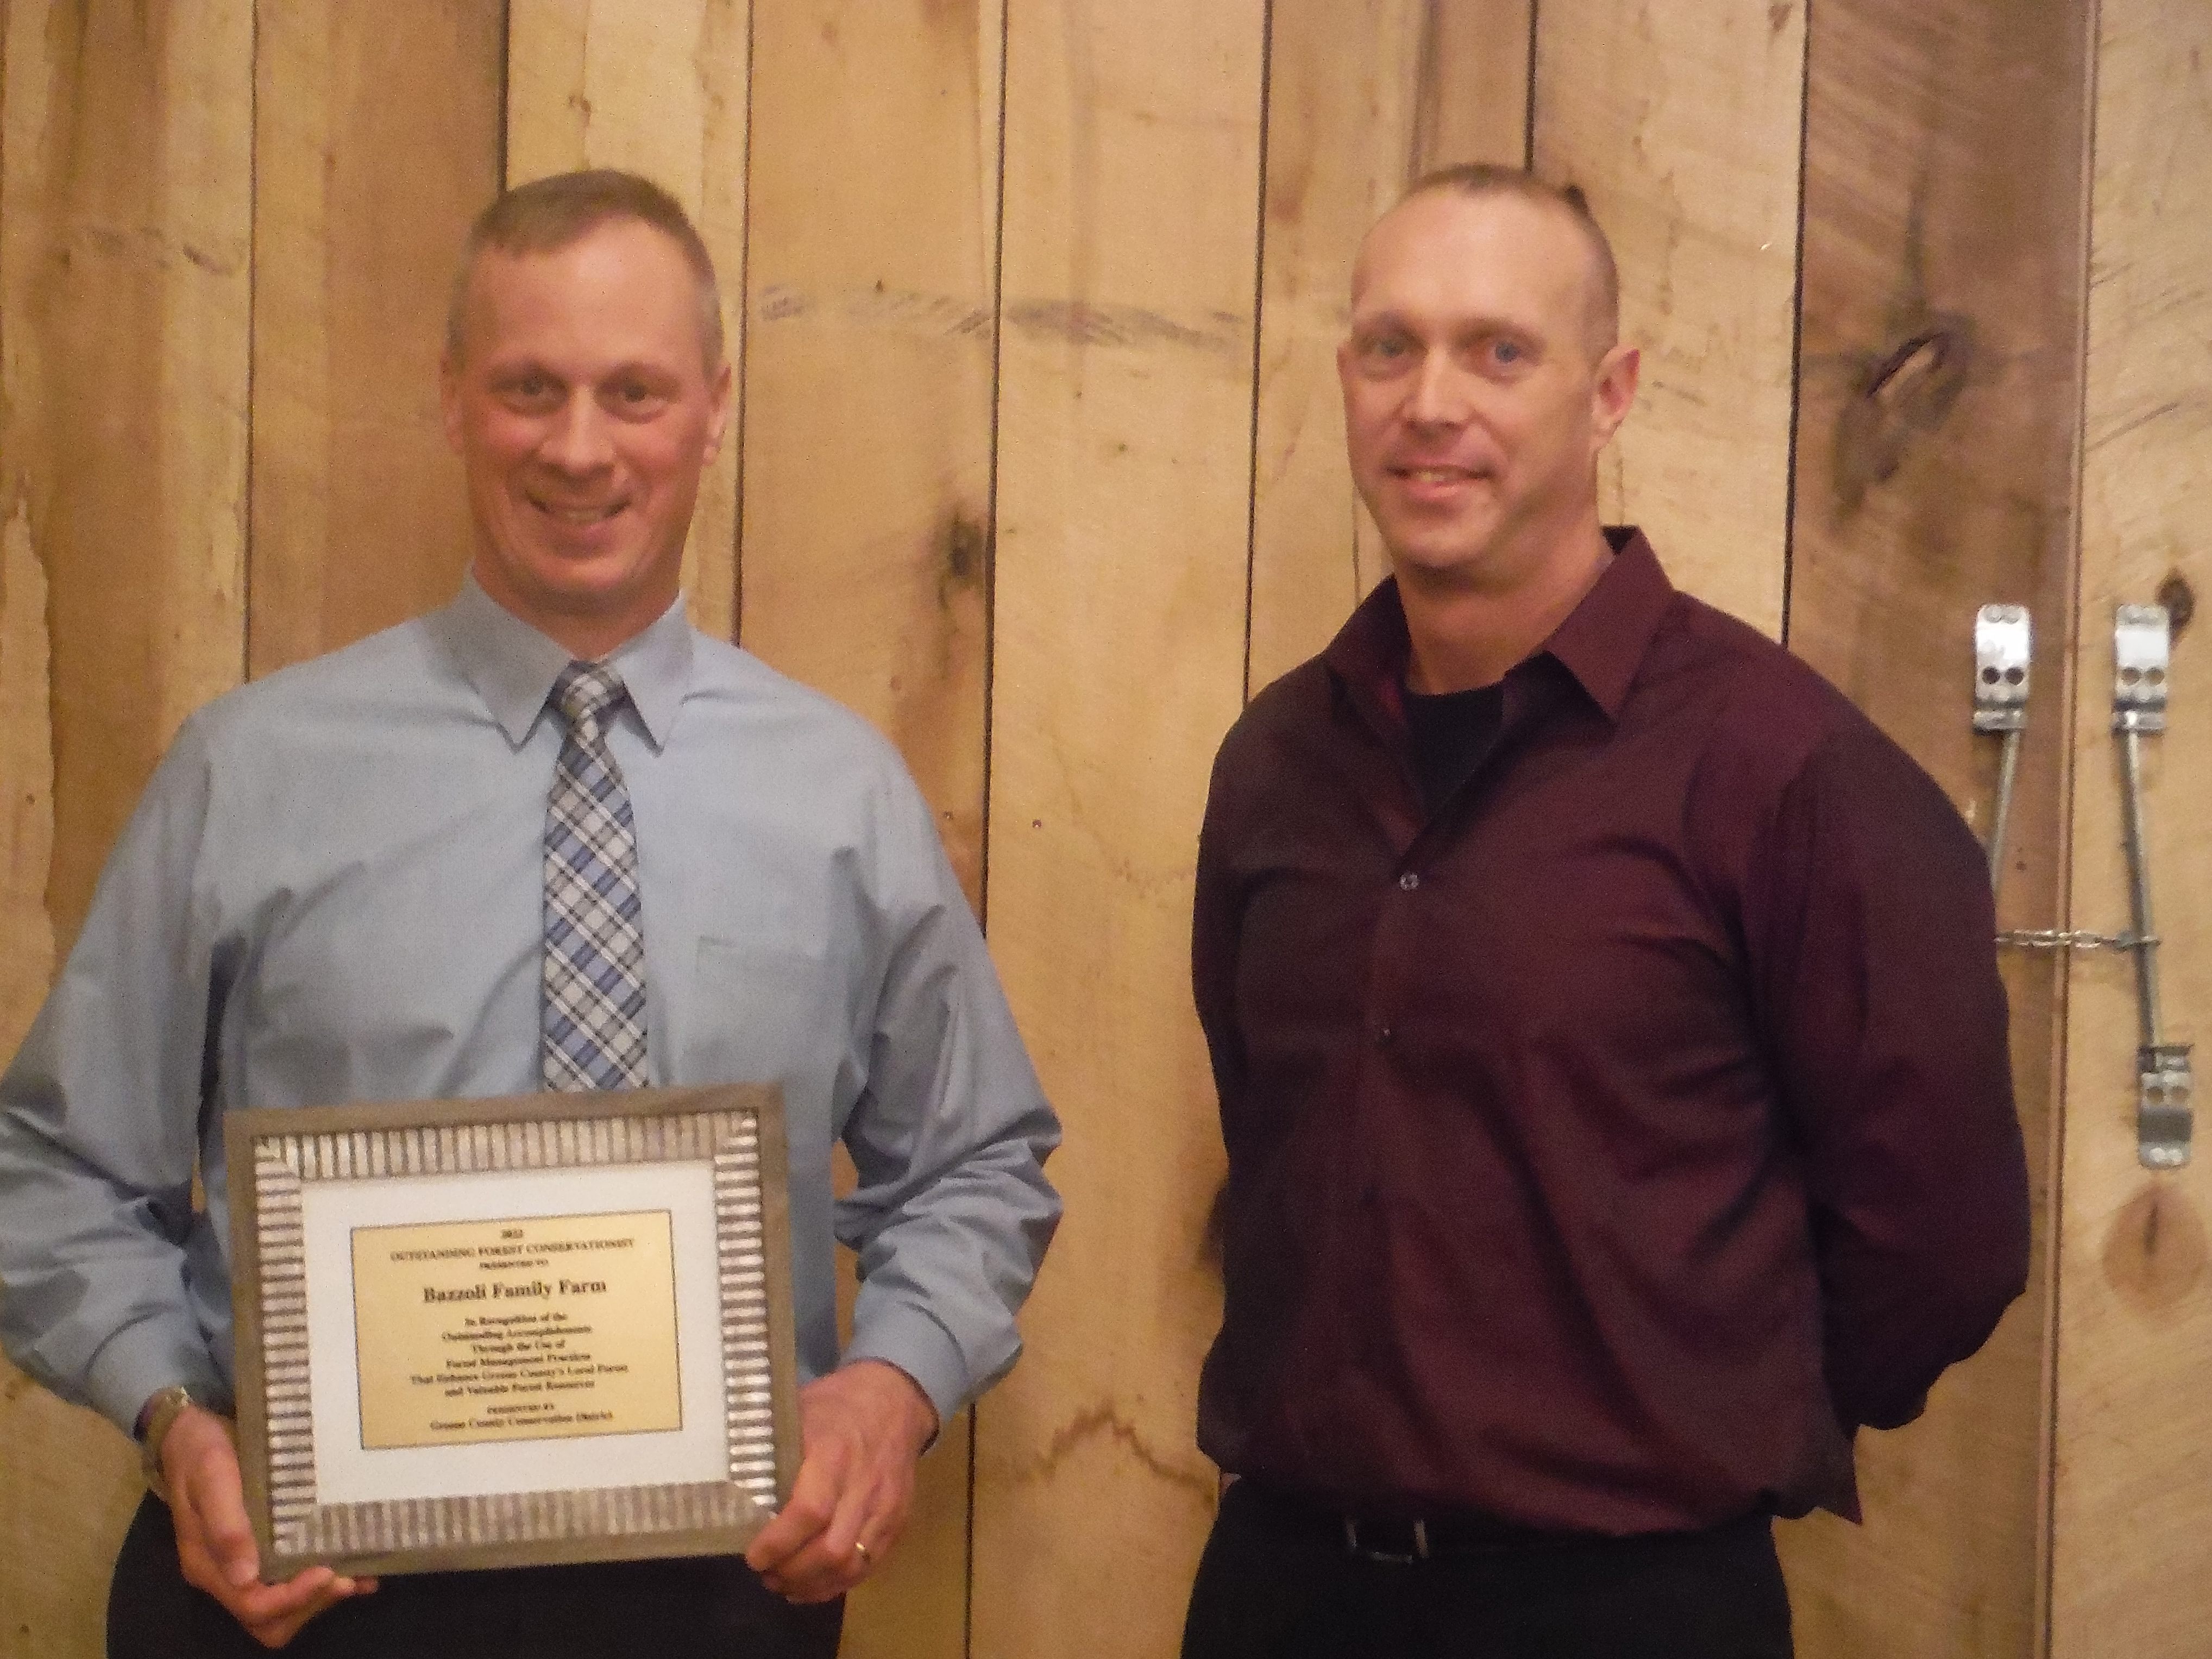 Dan Bazzoli was presented the 2022 Outstanding Forest Conservationist Award by Russell Gibbs, PA DCNR Service Forester at the Greene County Conservation DistrictÃ¢â‚¬â„¢s annual award ceremony on Wednesday, Dec. 14.